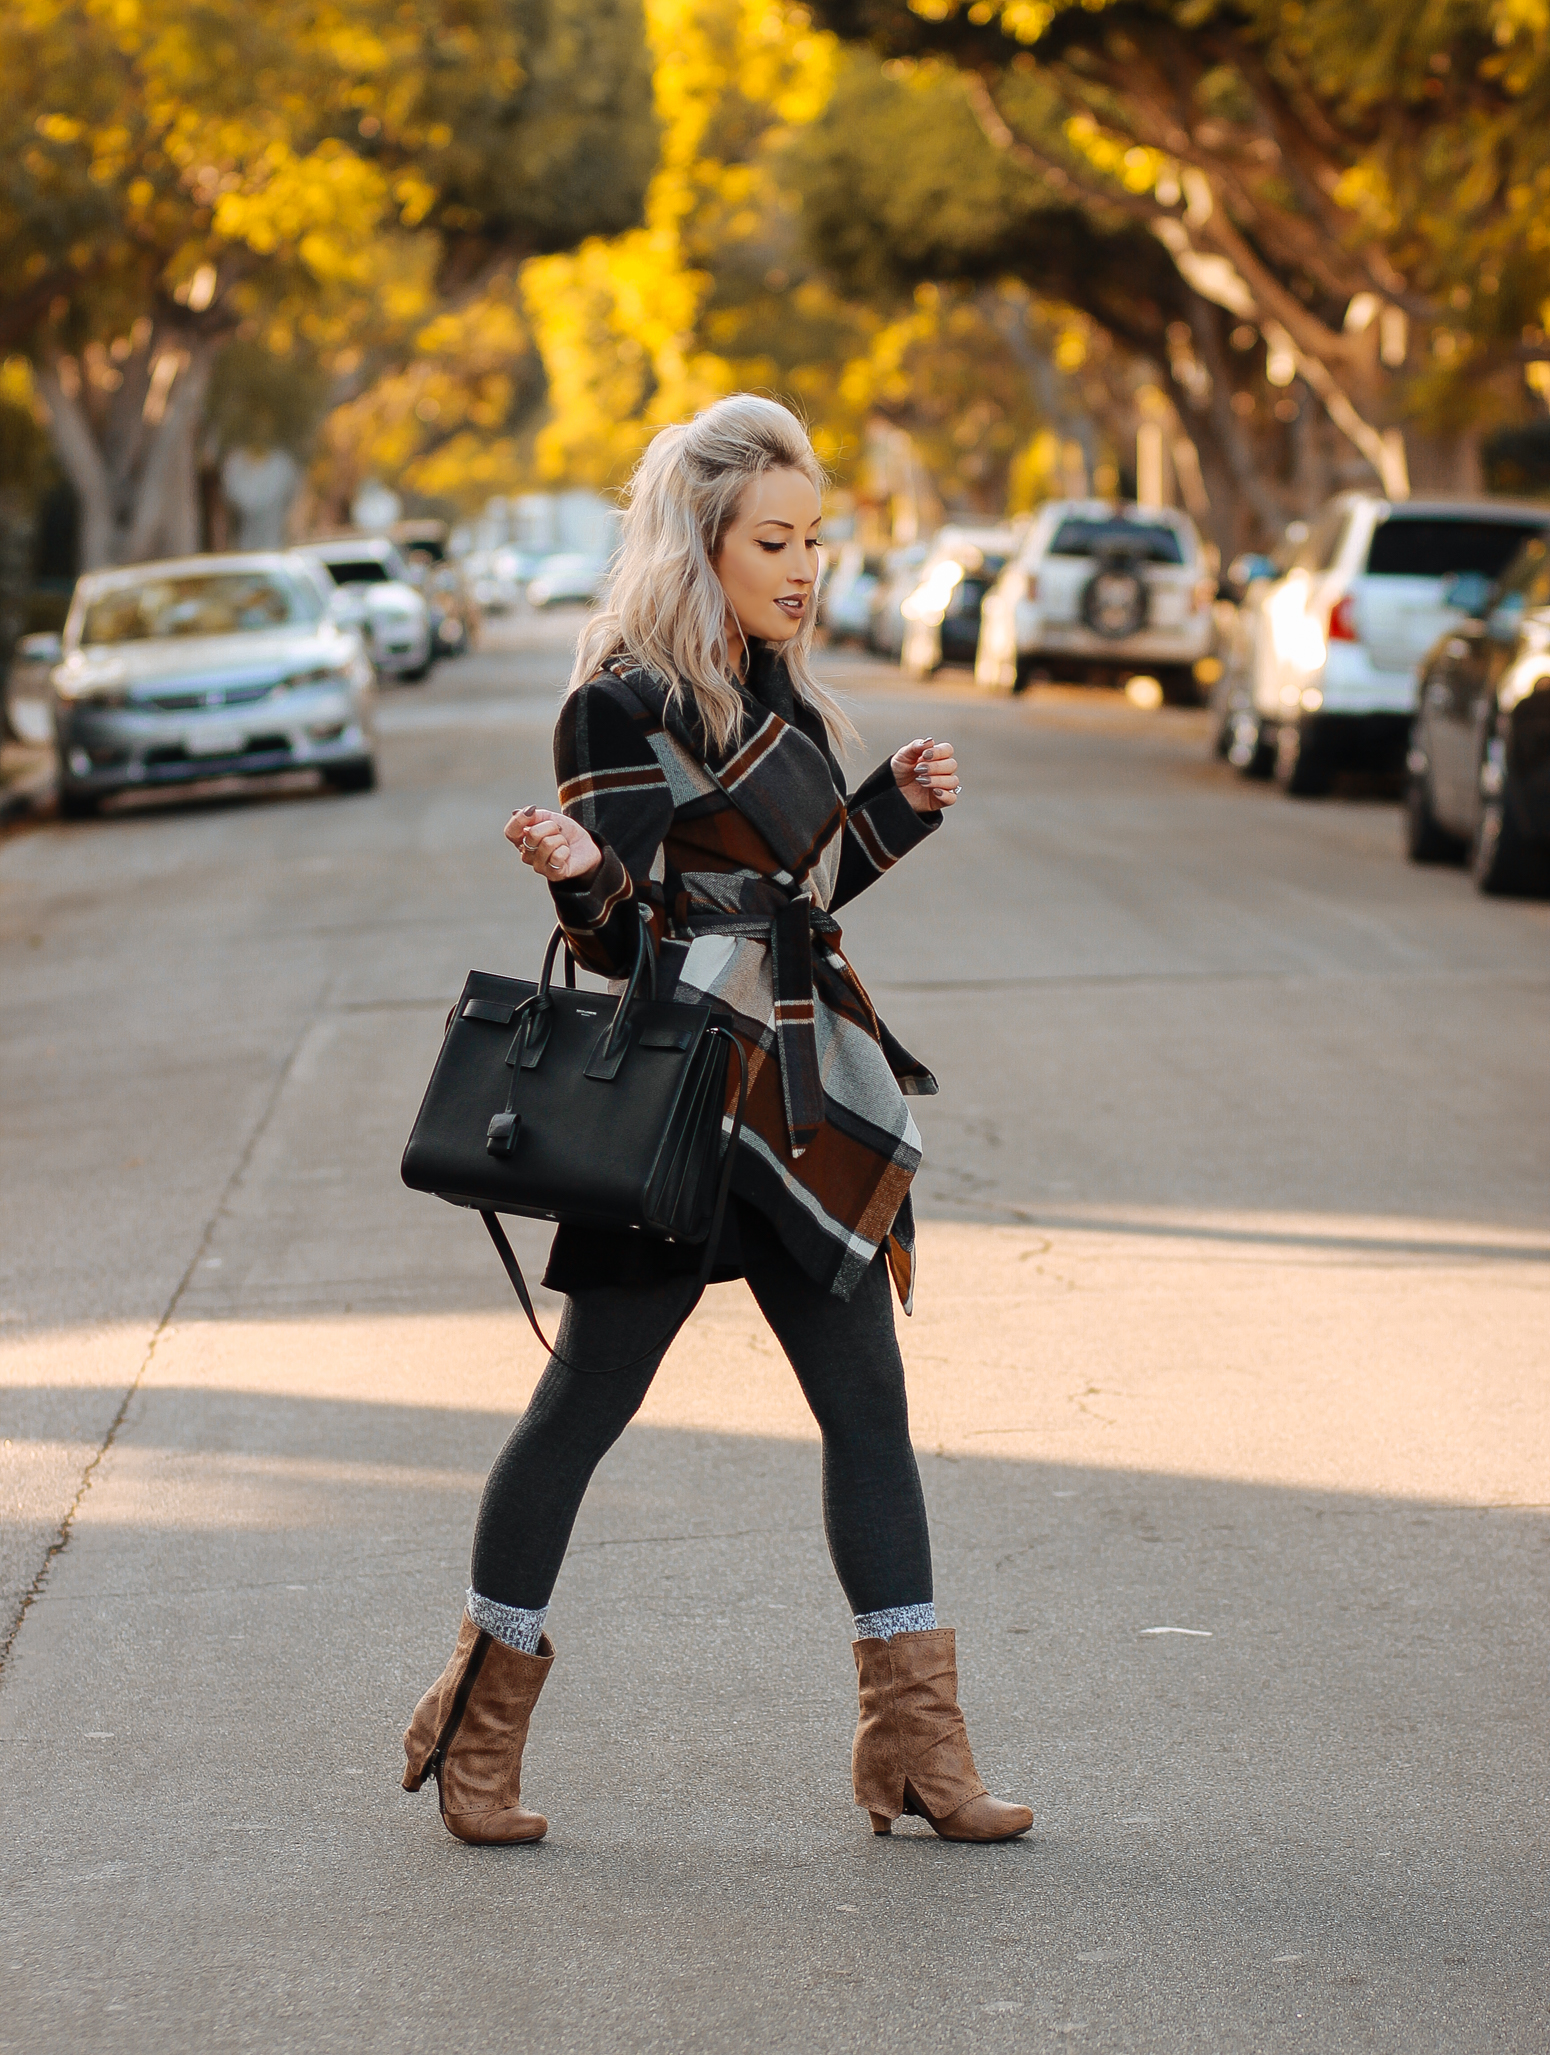 Blondie in the City | Plaid Coat @chicwish | Fall and Winter Fashion | YSL Bag